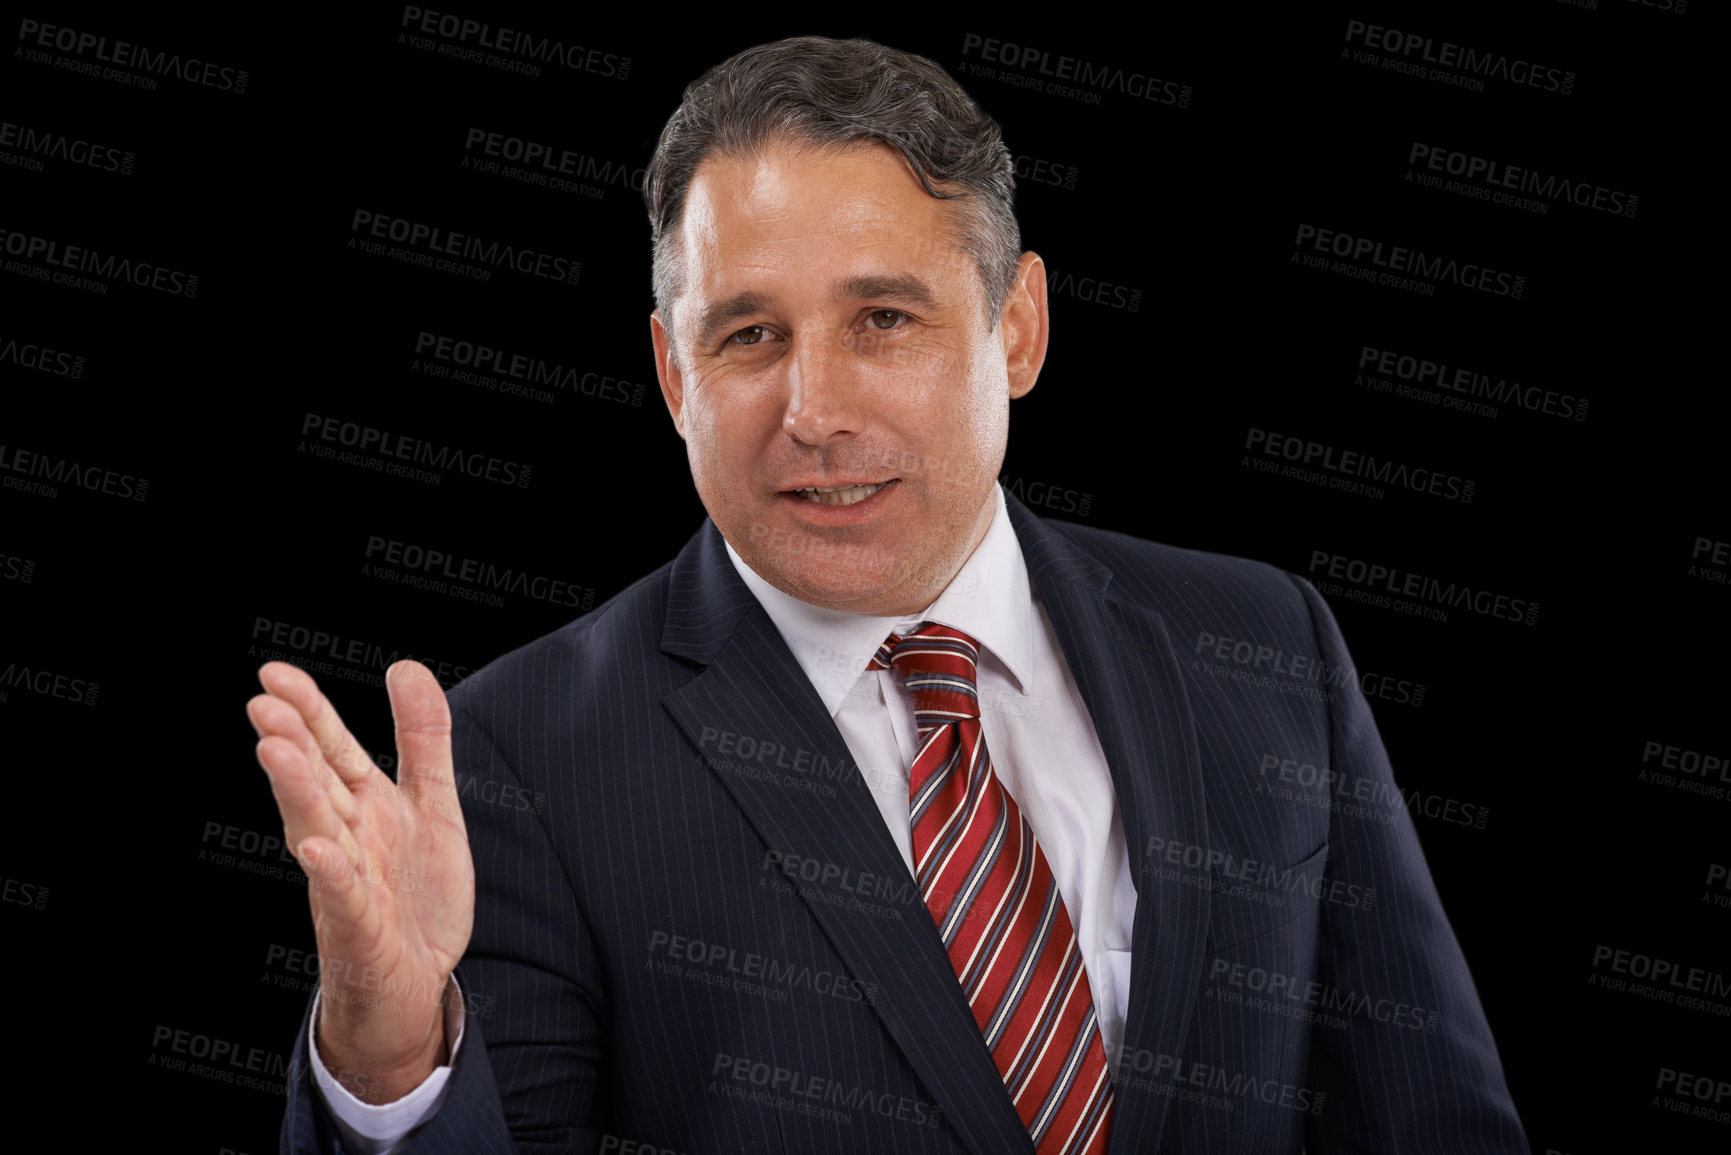 Buy stock photo A serious man in a suit gesturing with his hand while speaking